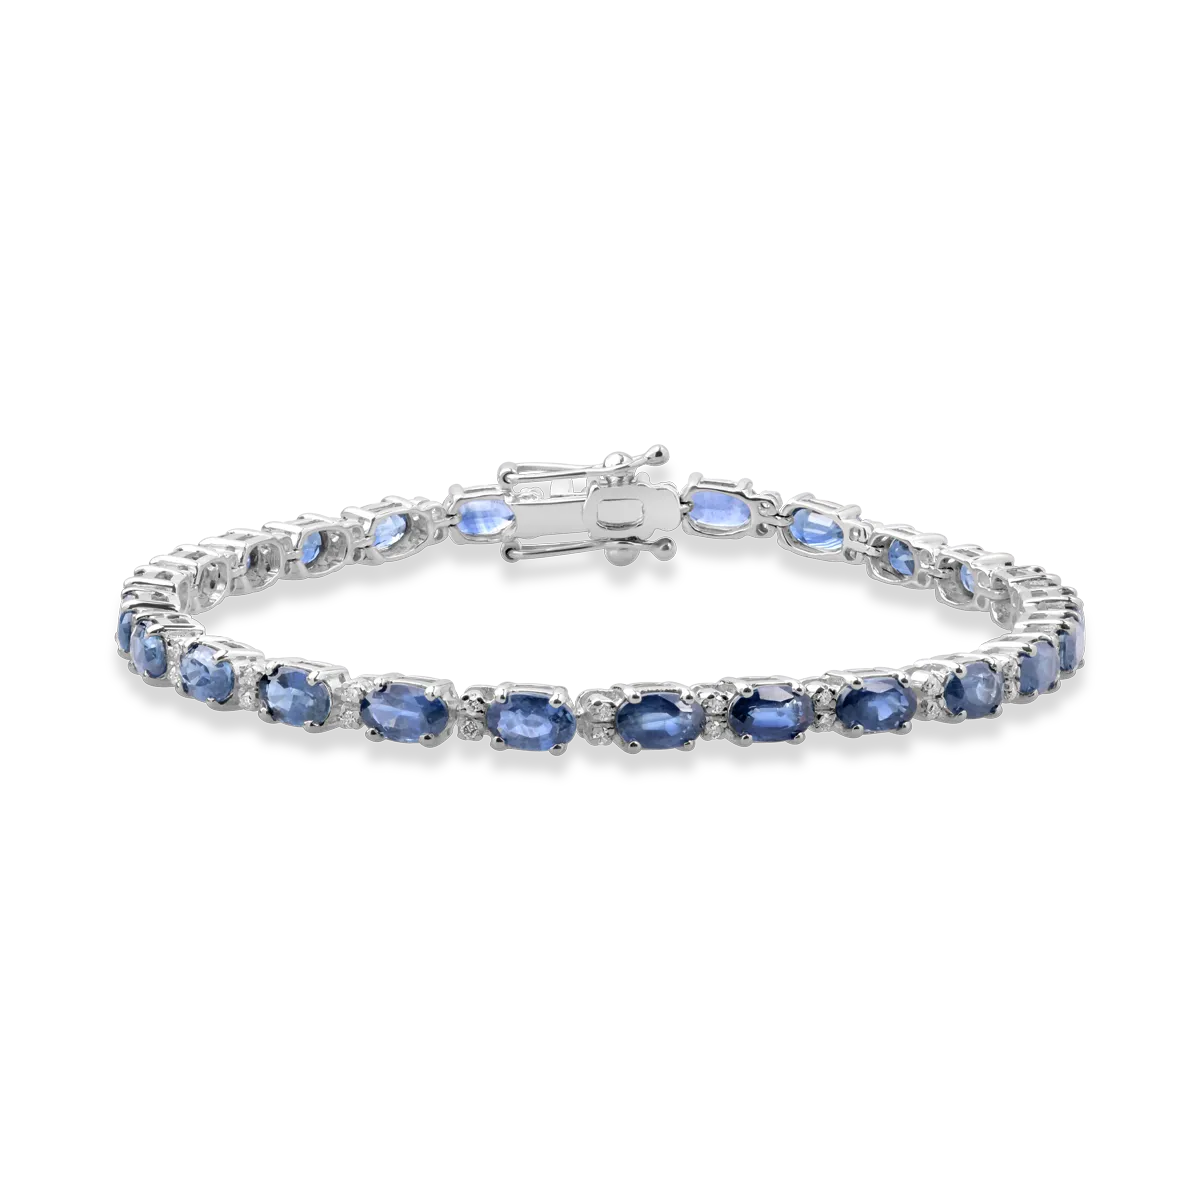 18K white gold tennis bracelet with 9.2ct sapphires and 0.3ct diamonds